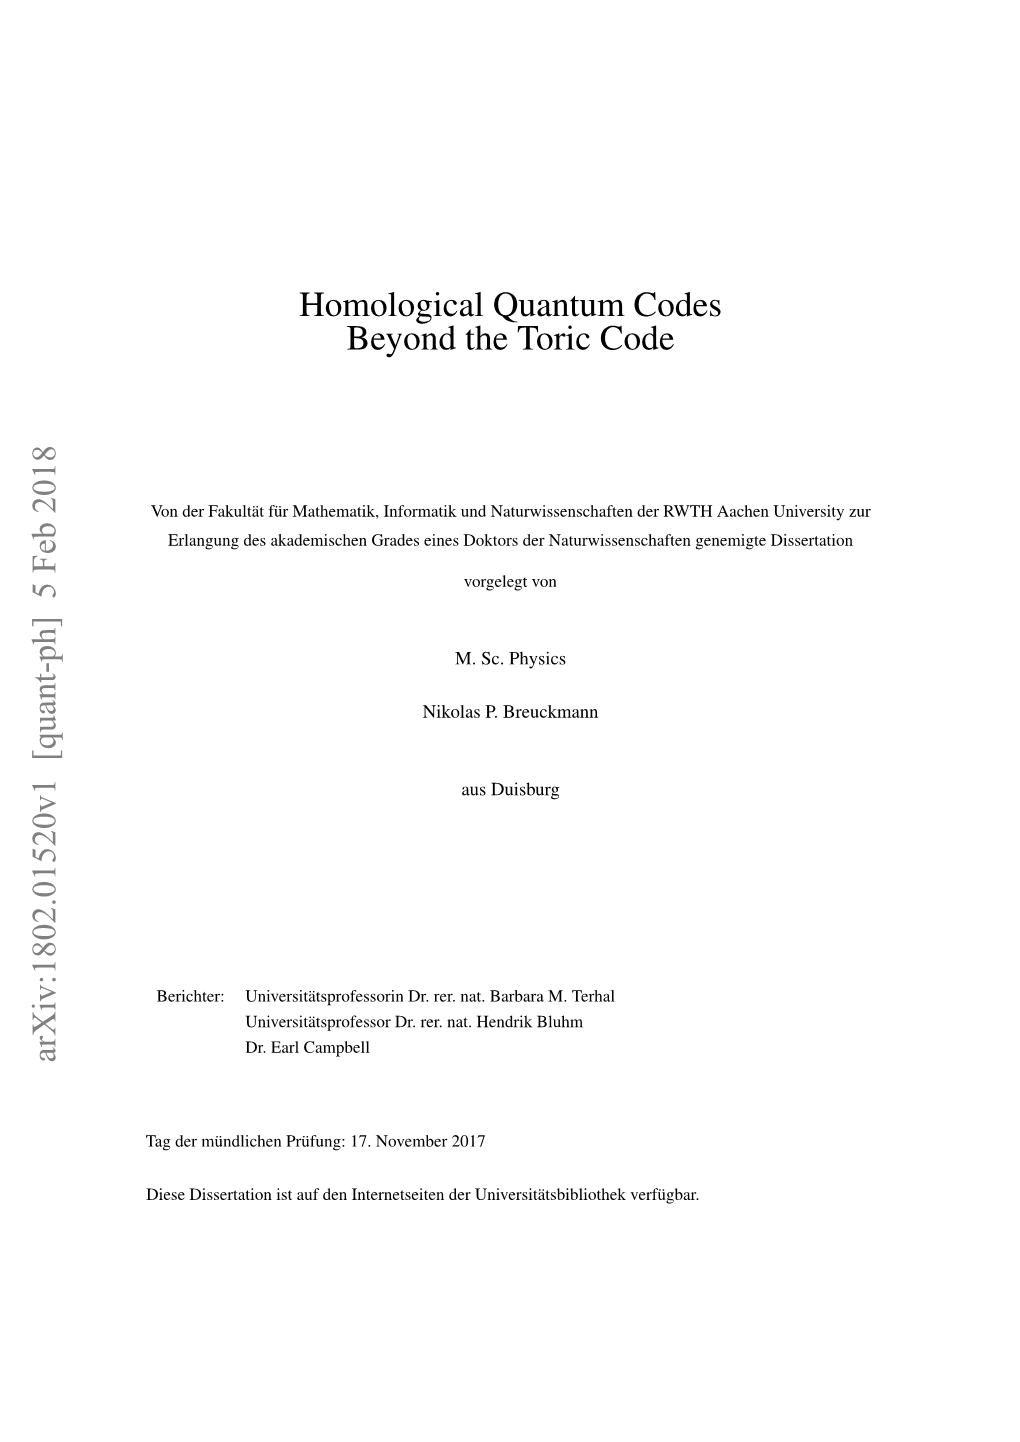 Homological Quantum Codes Beyond the Toric Code